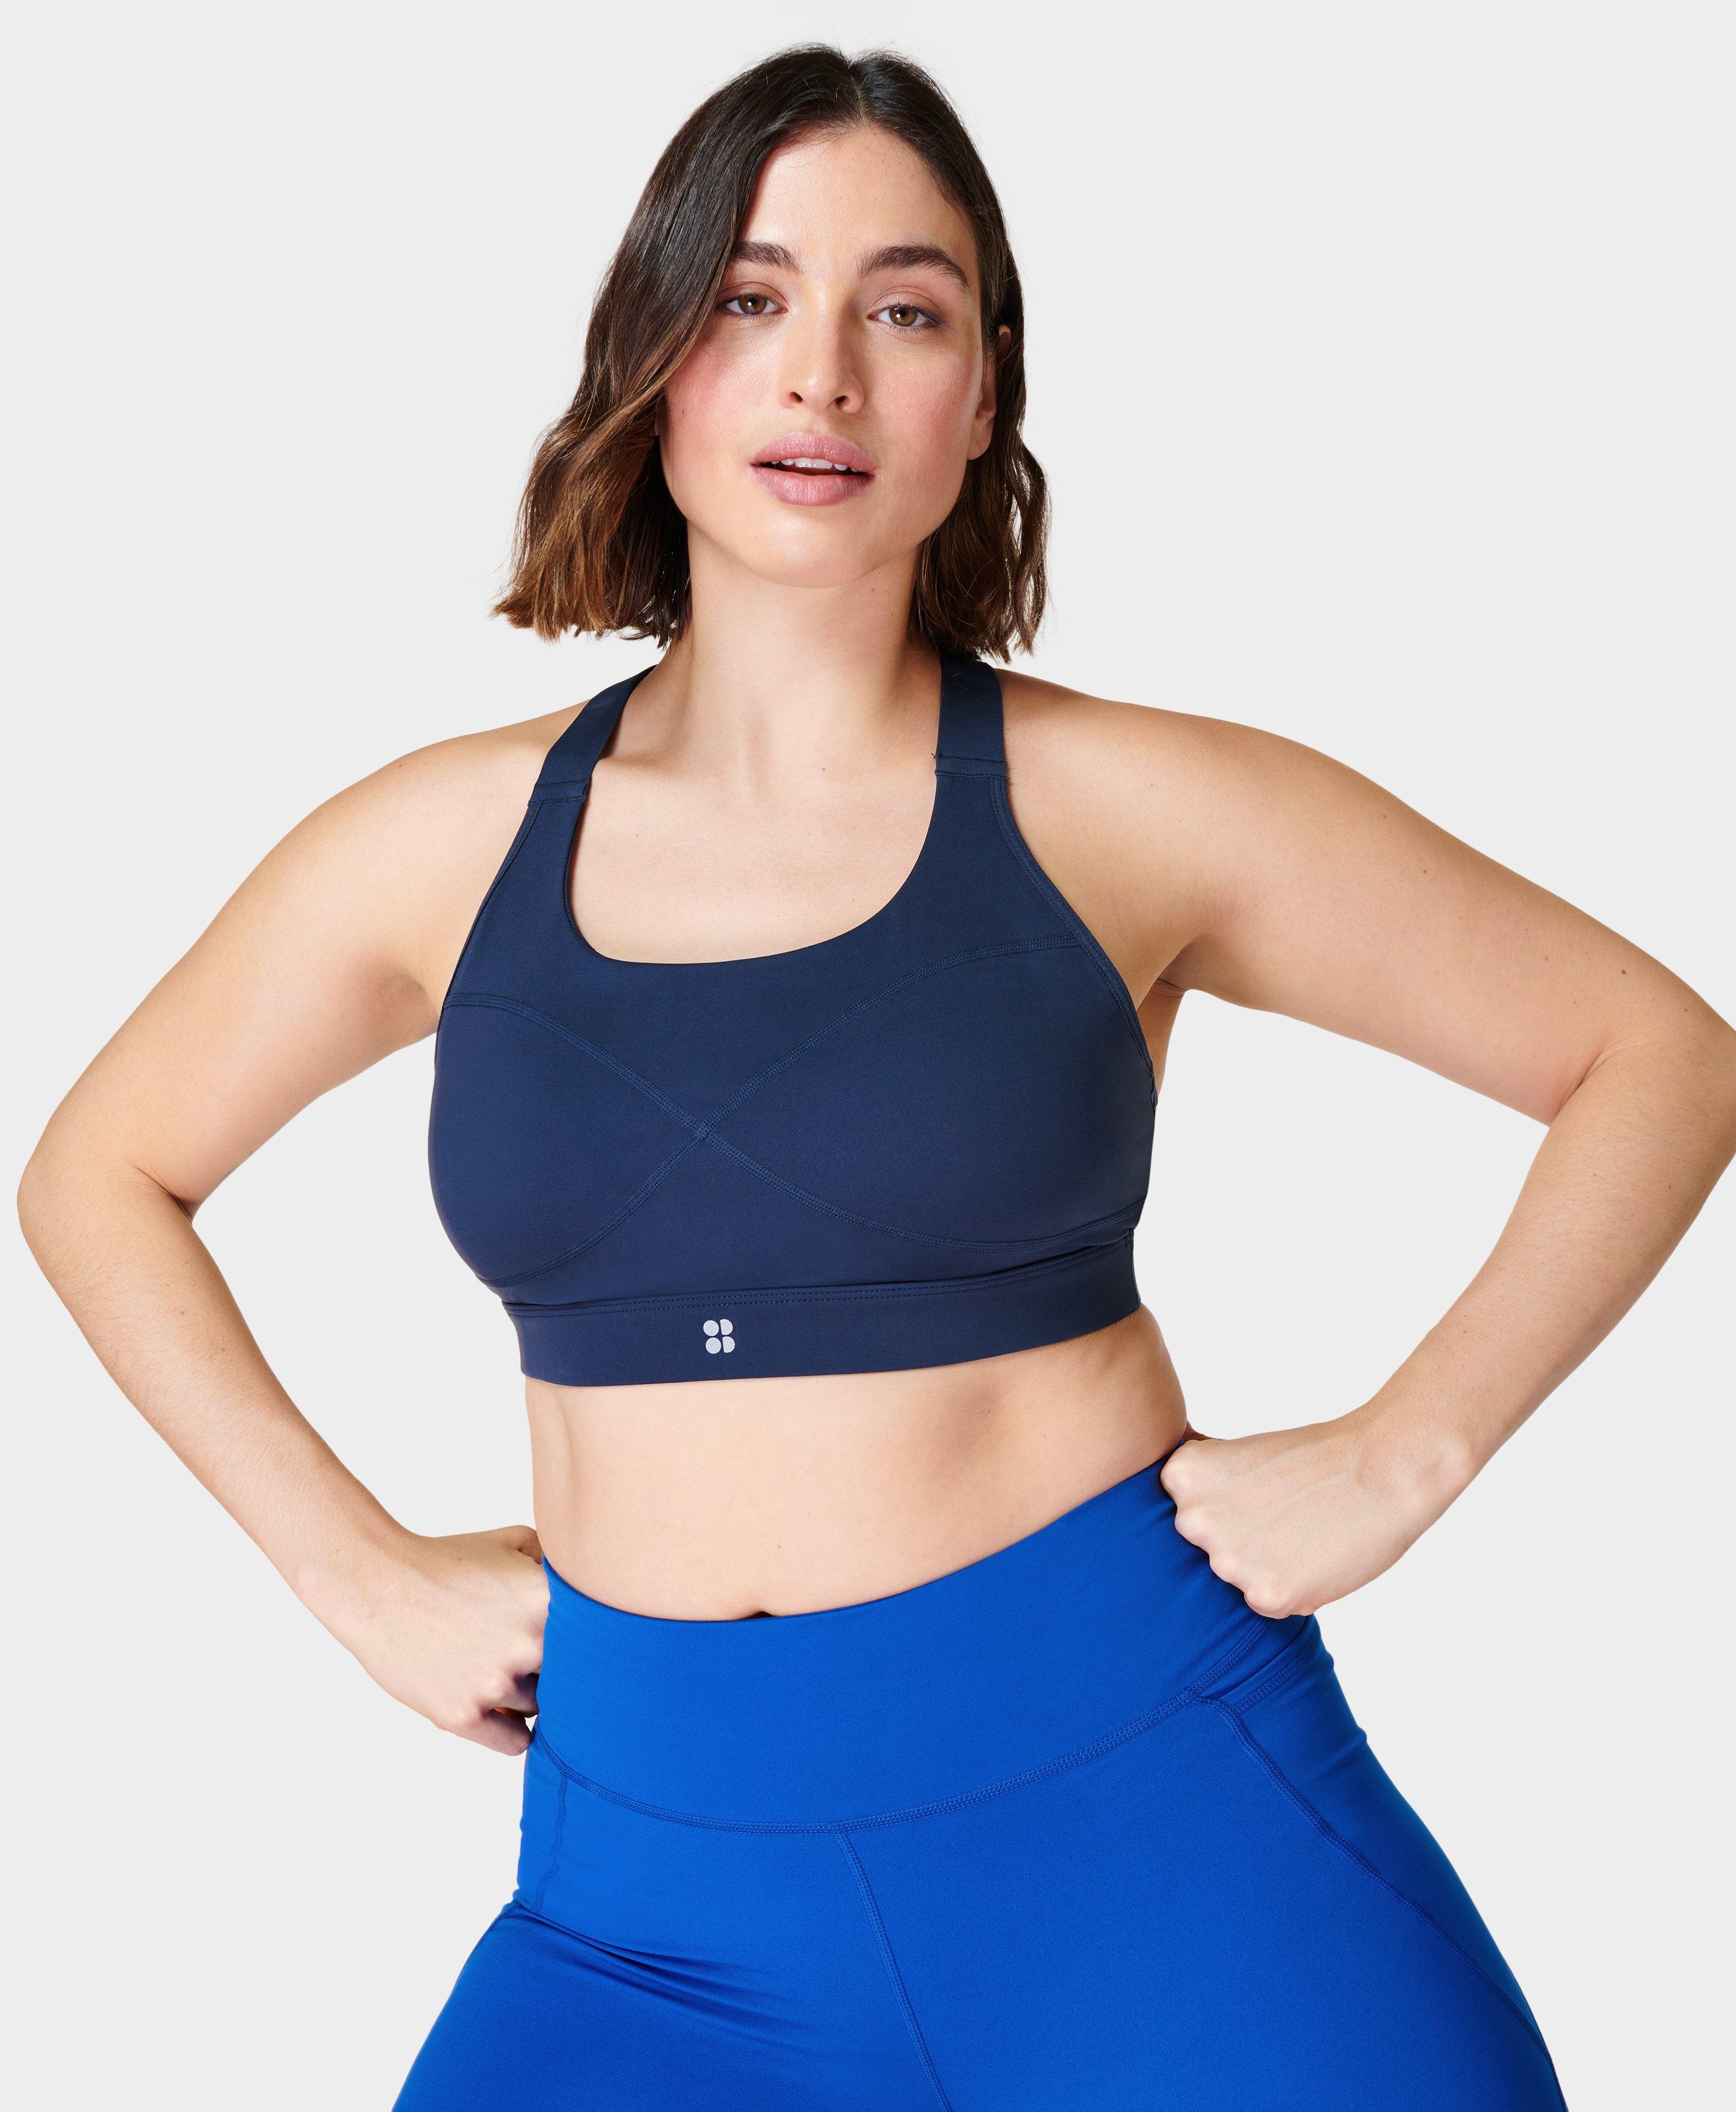 Shop Women's Performance Work Out Bras - Fatigues Army Navy